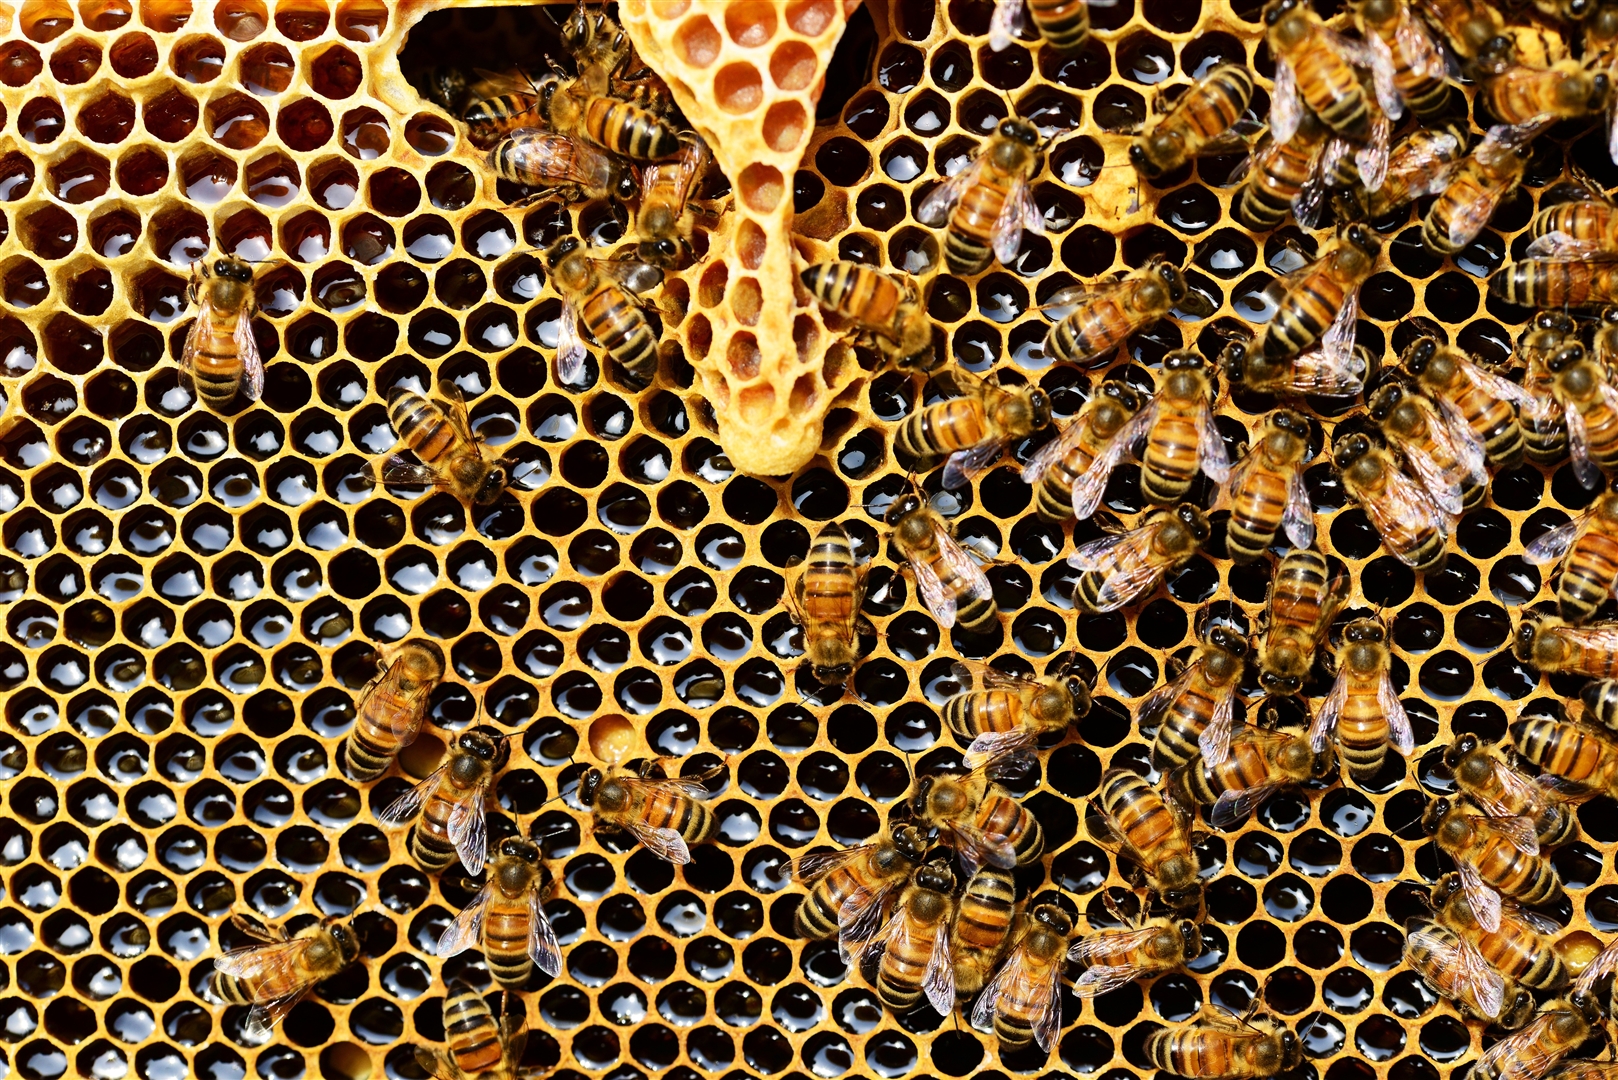 Draft Local Planning Policy for Beekeeping